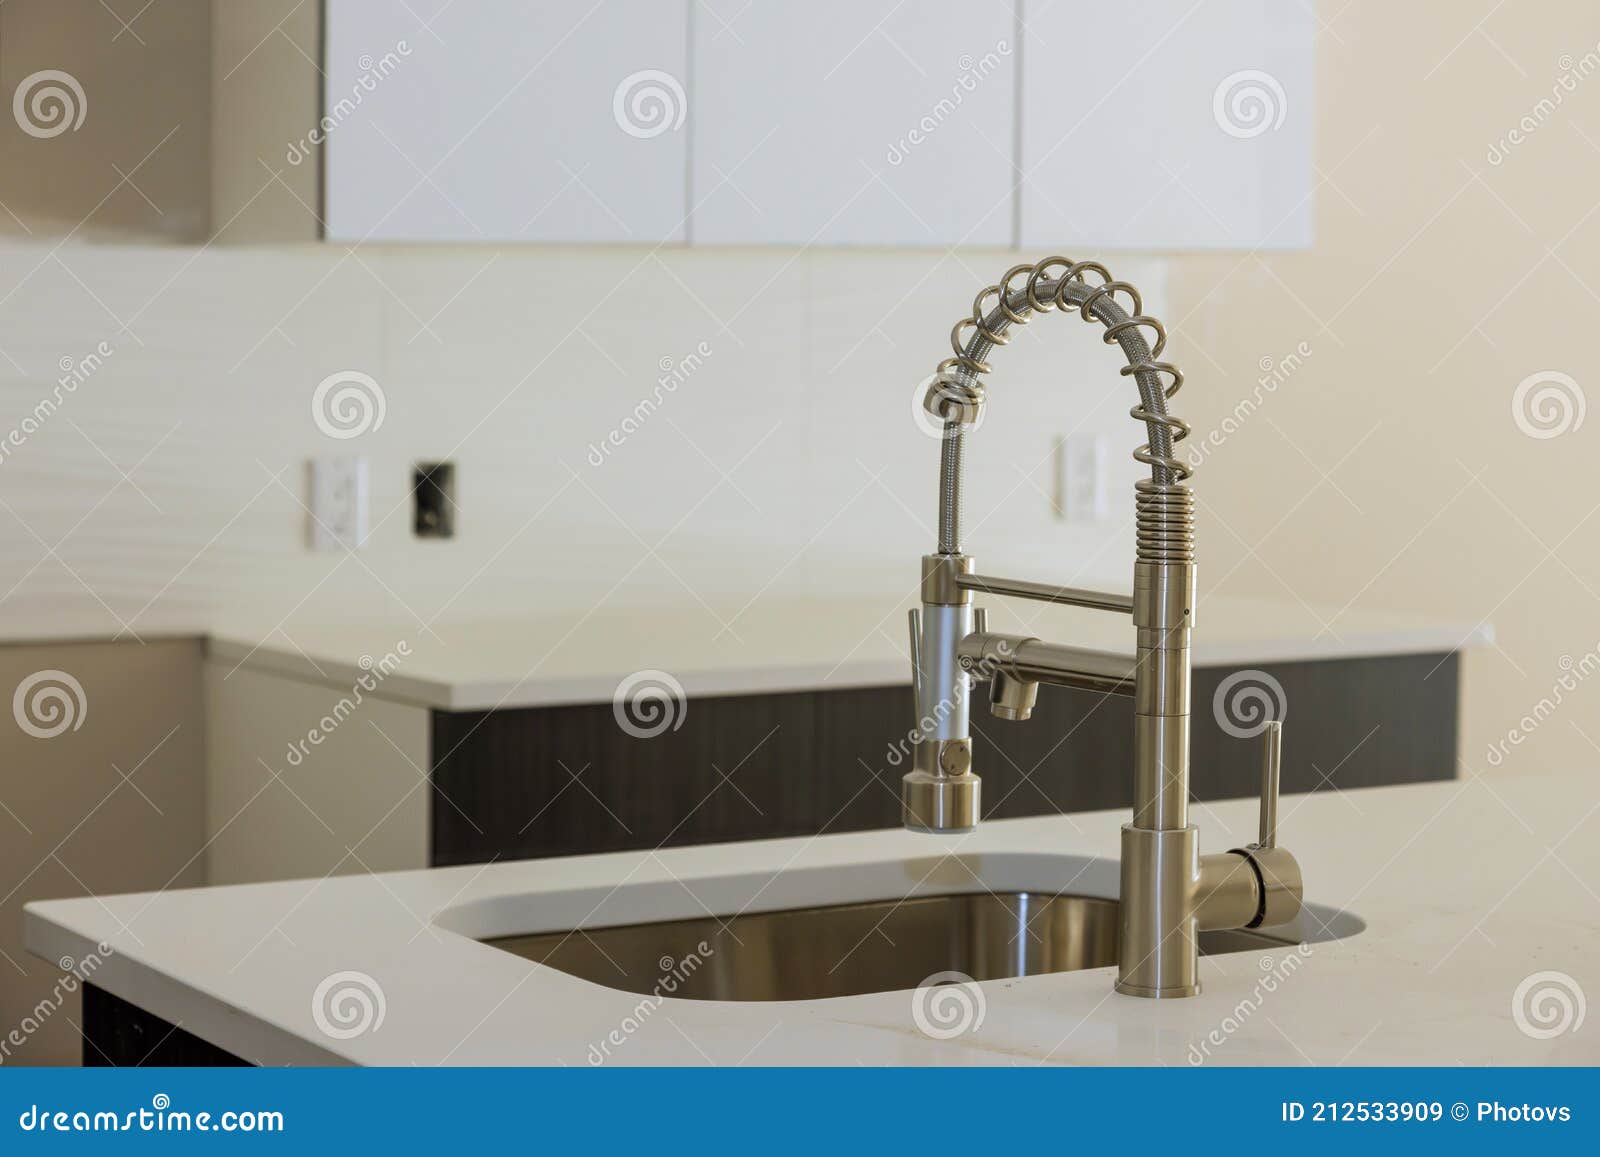 Installing New Sink Tape in the Kitchen Plumber with Island Sink Stock ...